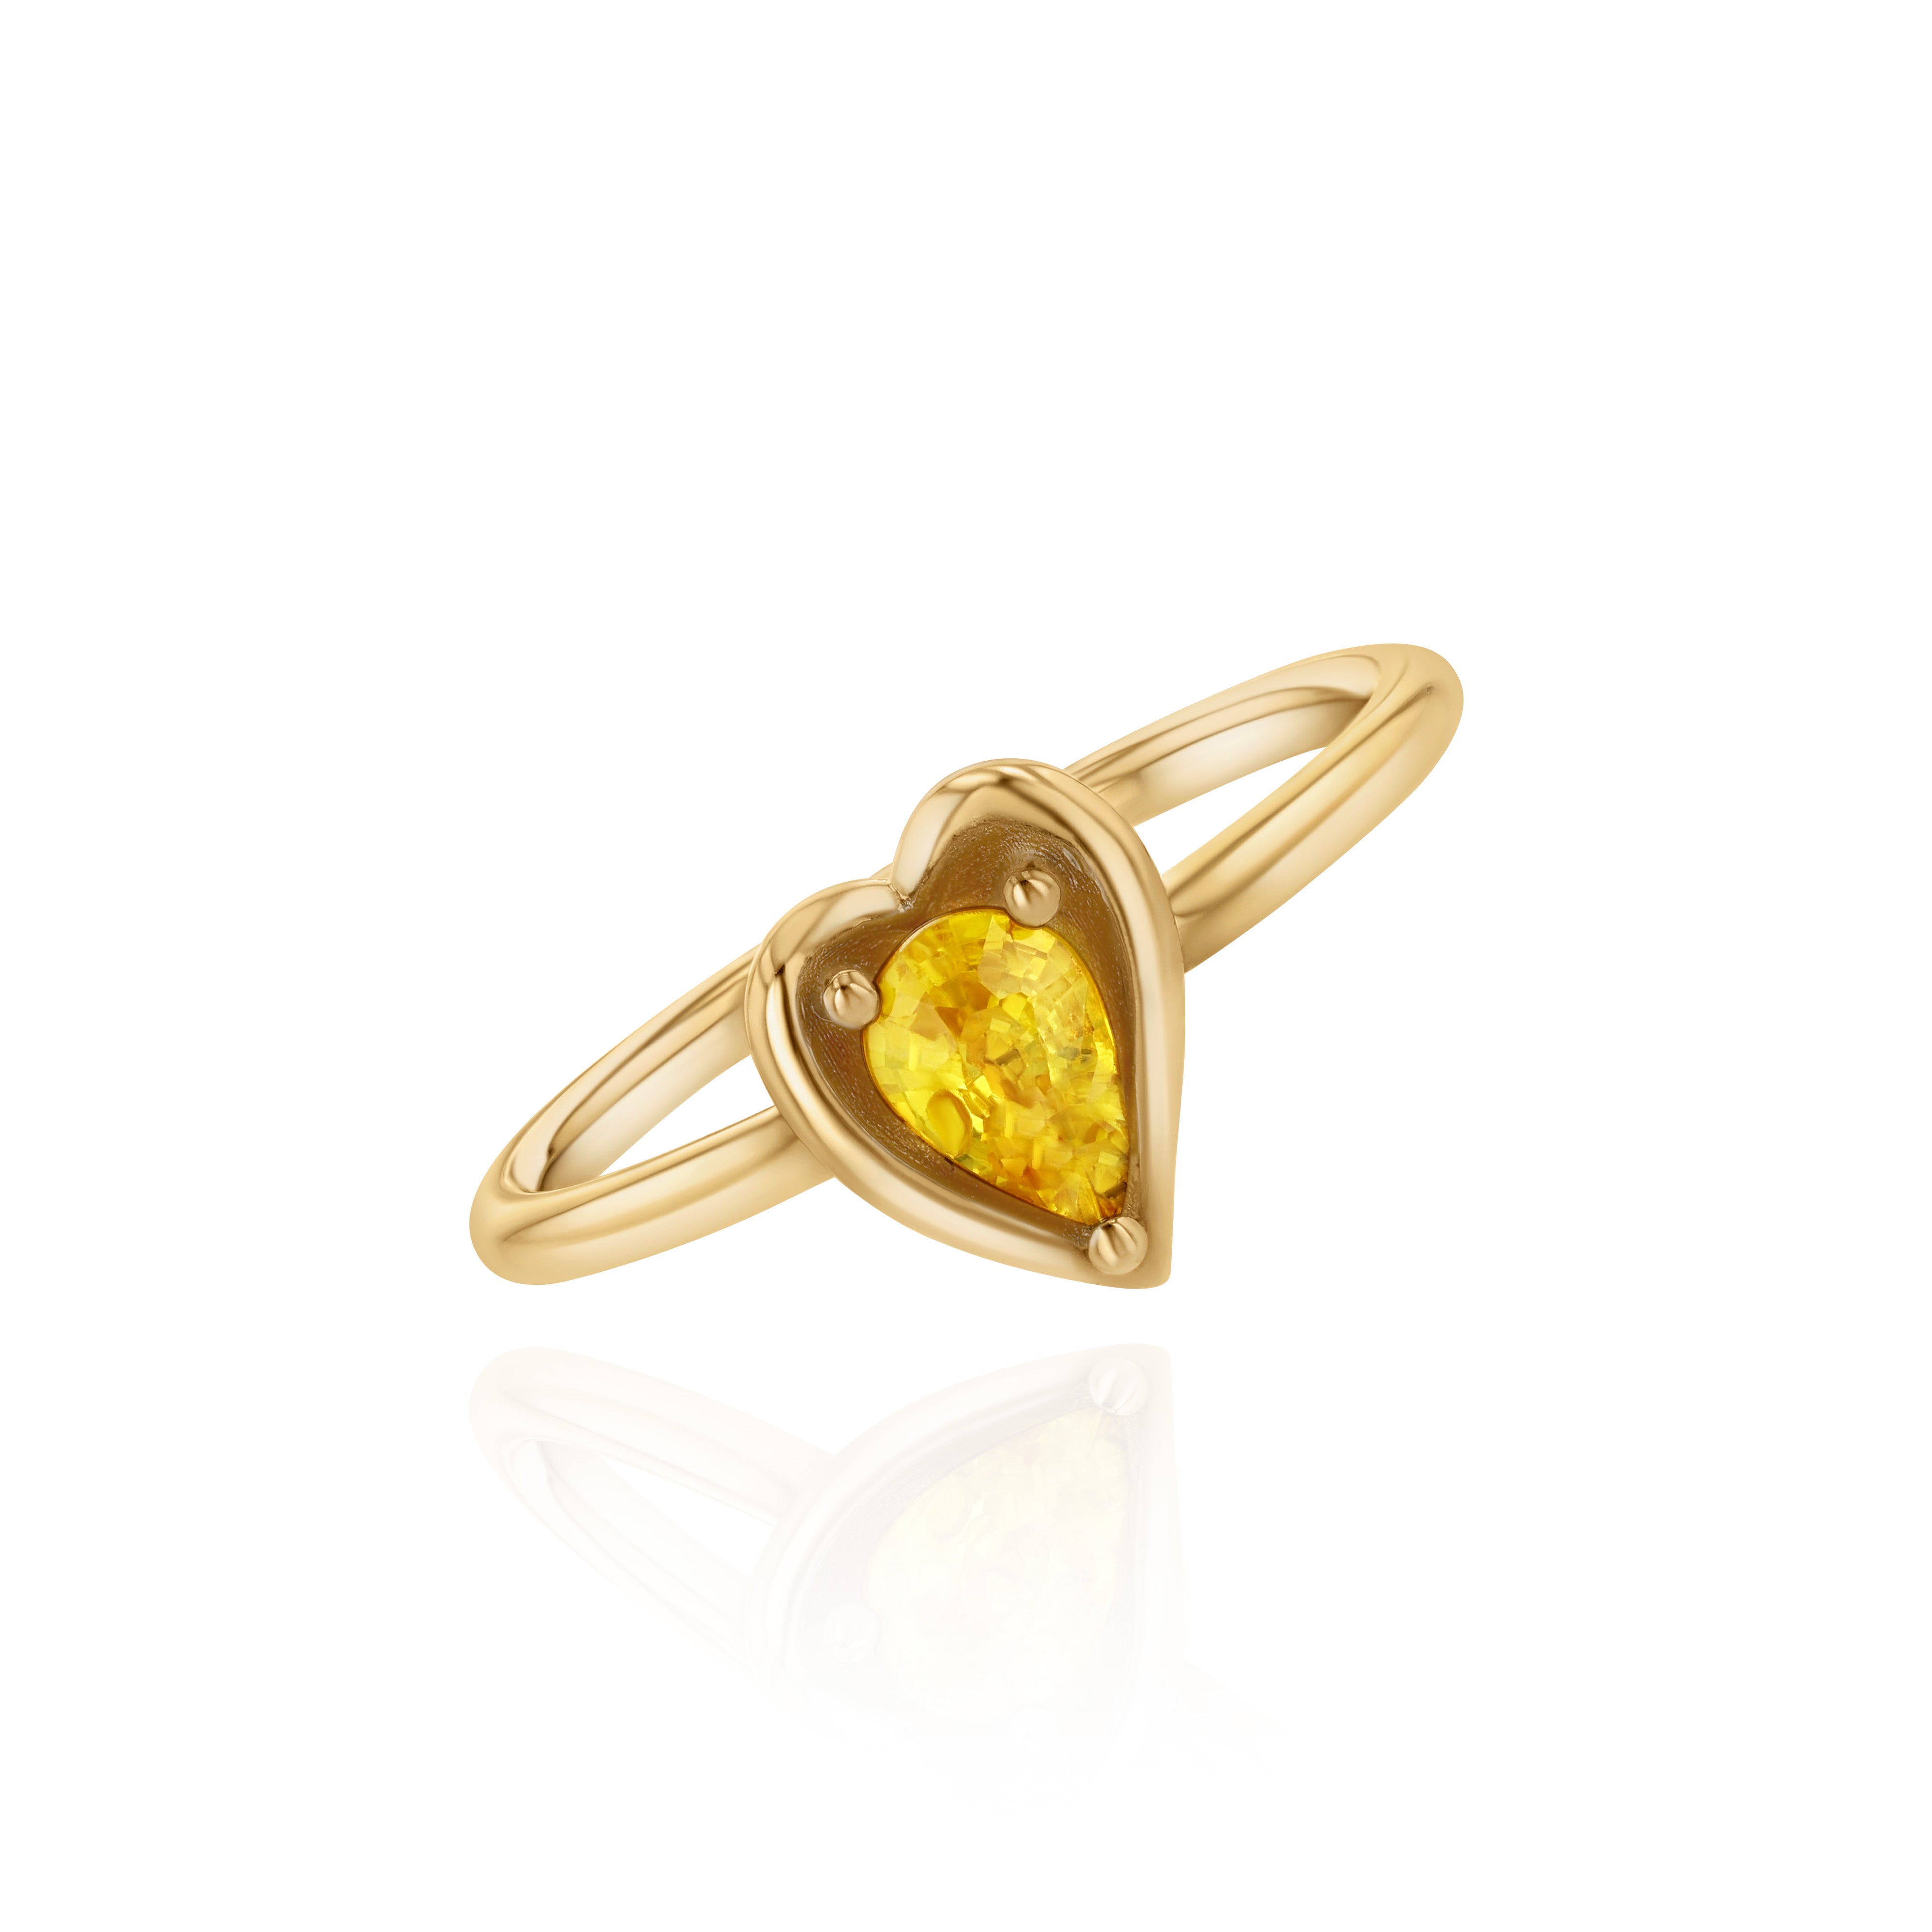 Yellow Gold heart shaped ring with a pear shaped Yellow Sapphire, Small